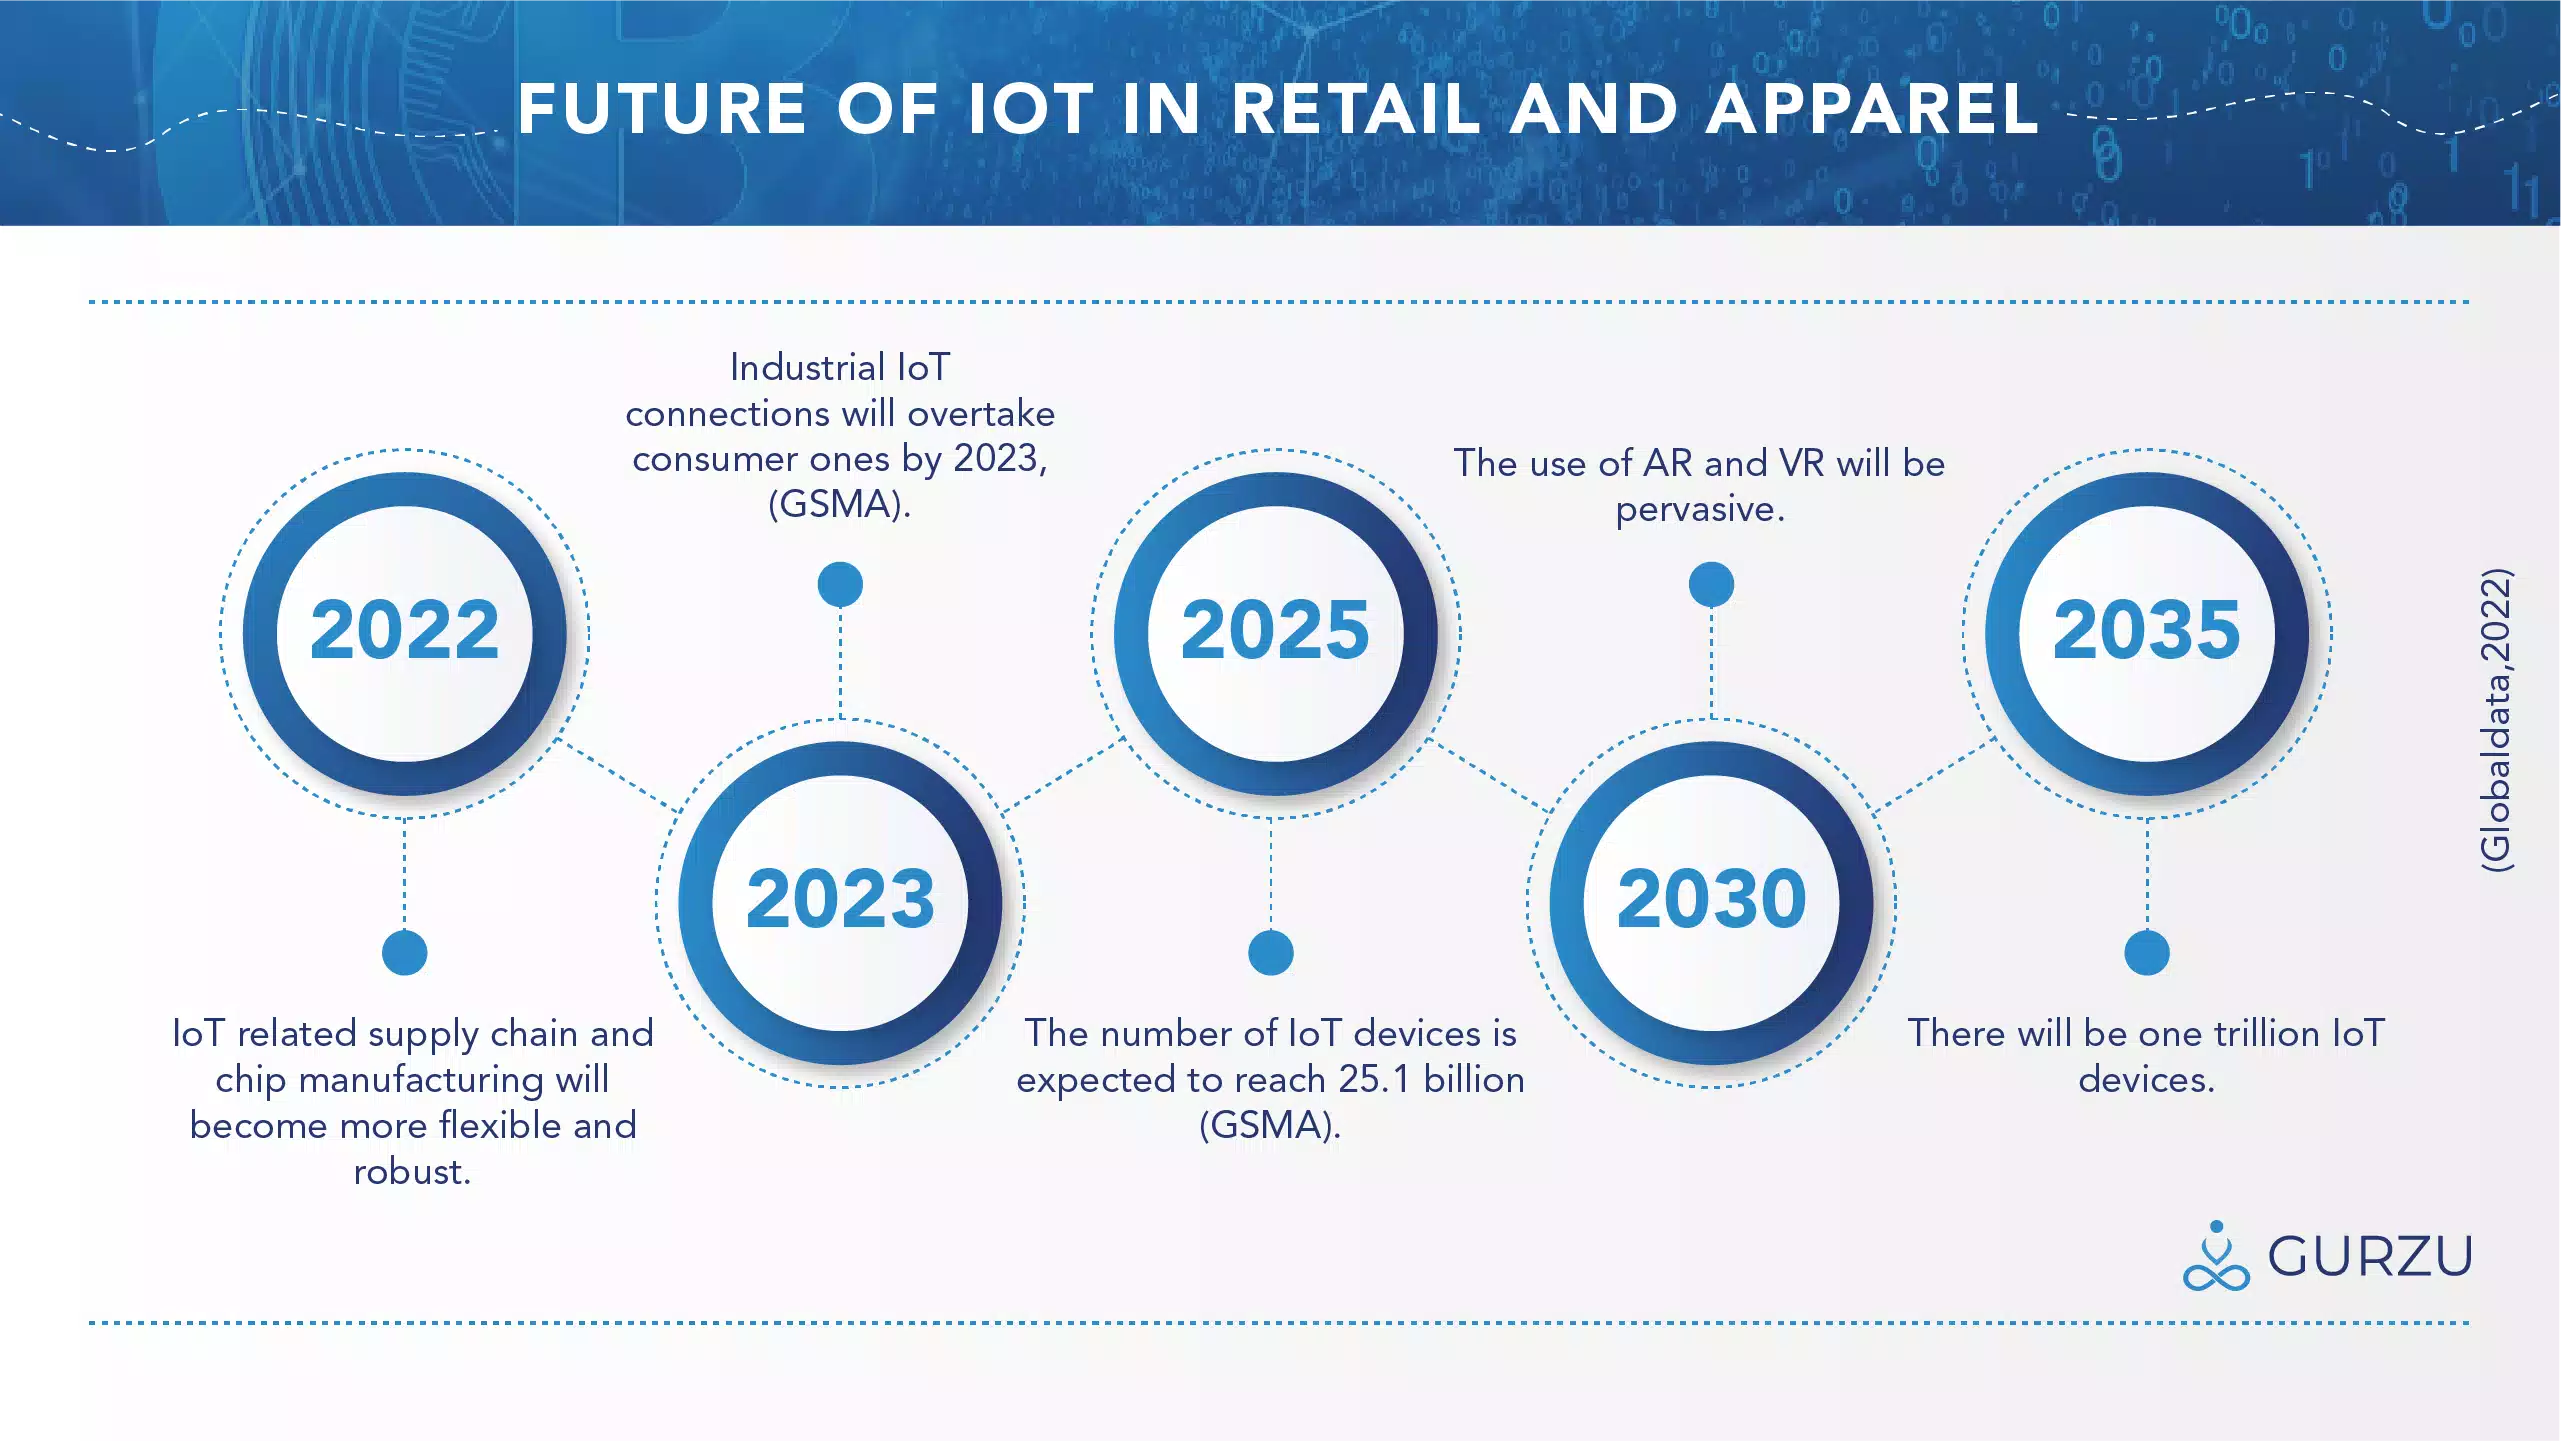 Future of IoT in Retail in Apparel